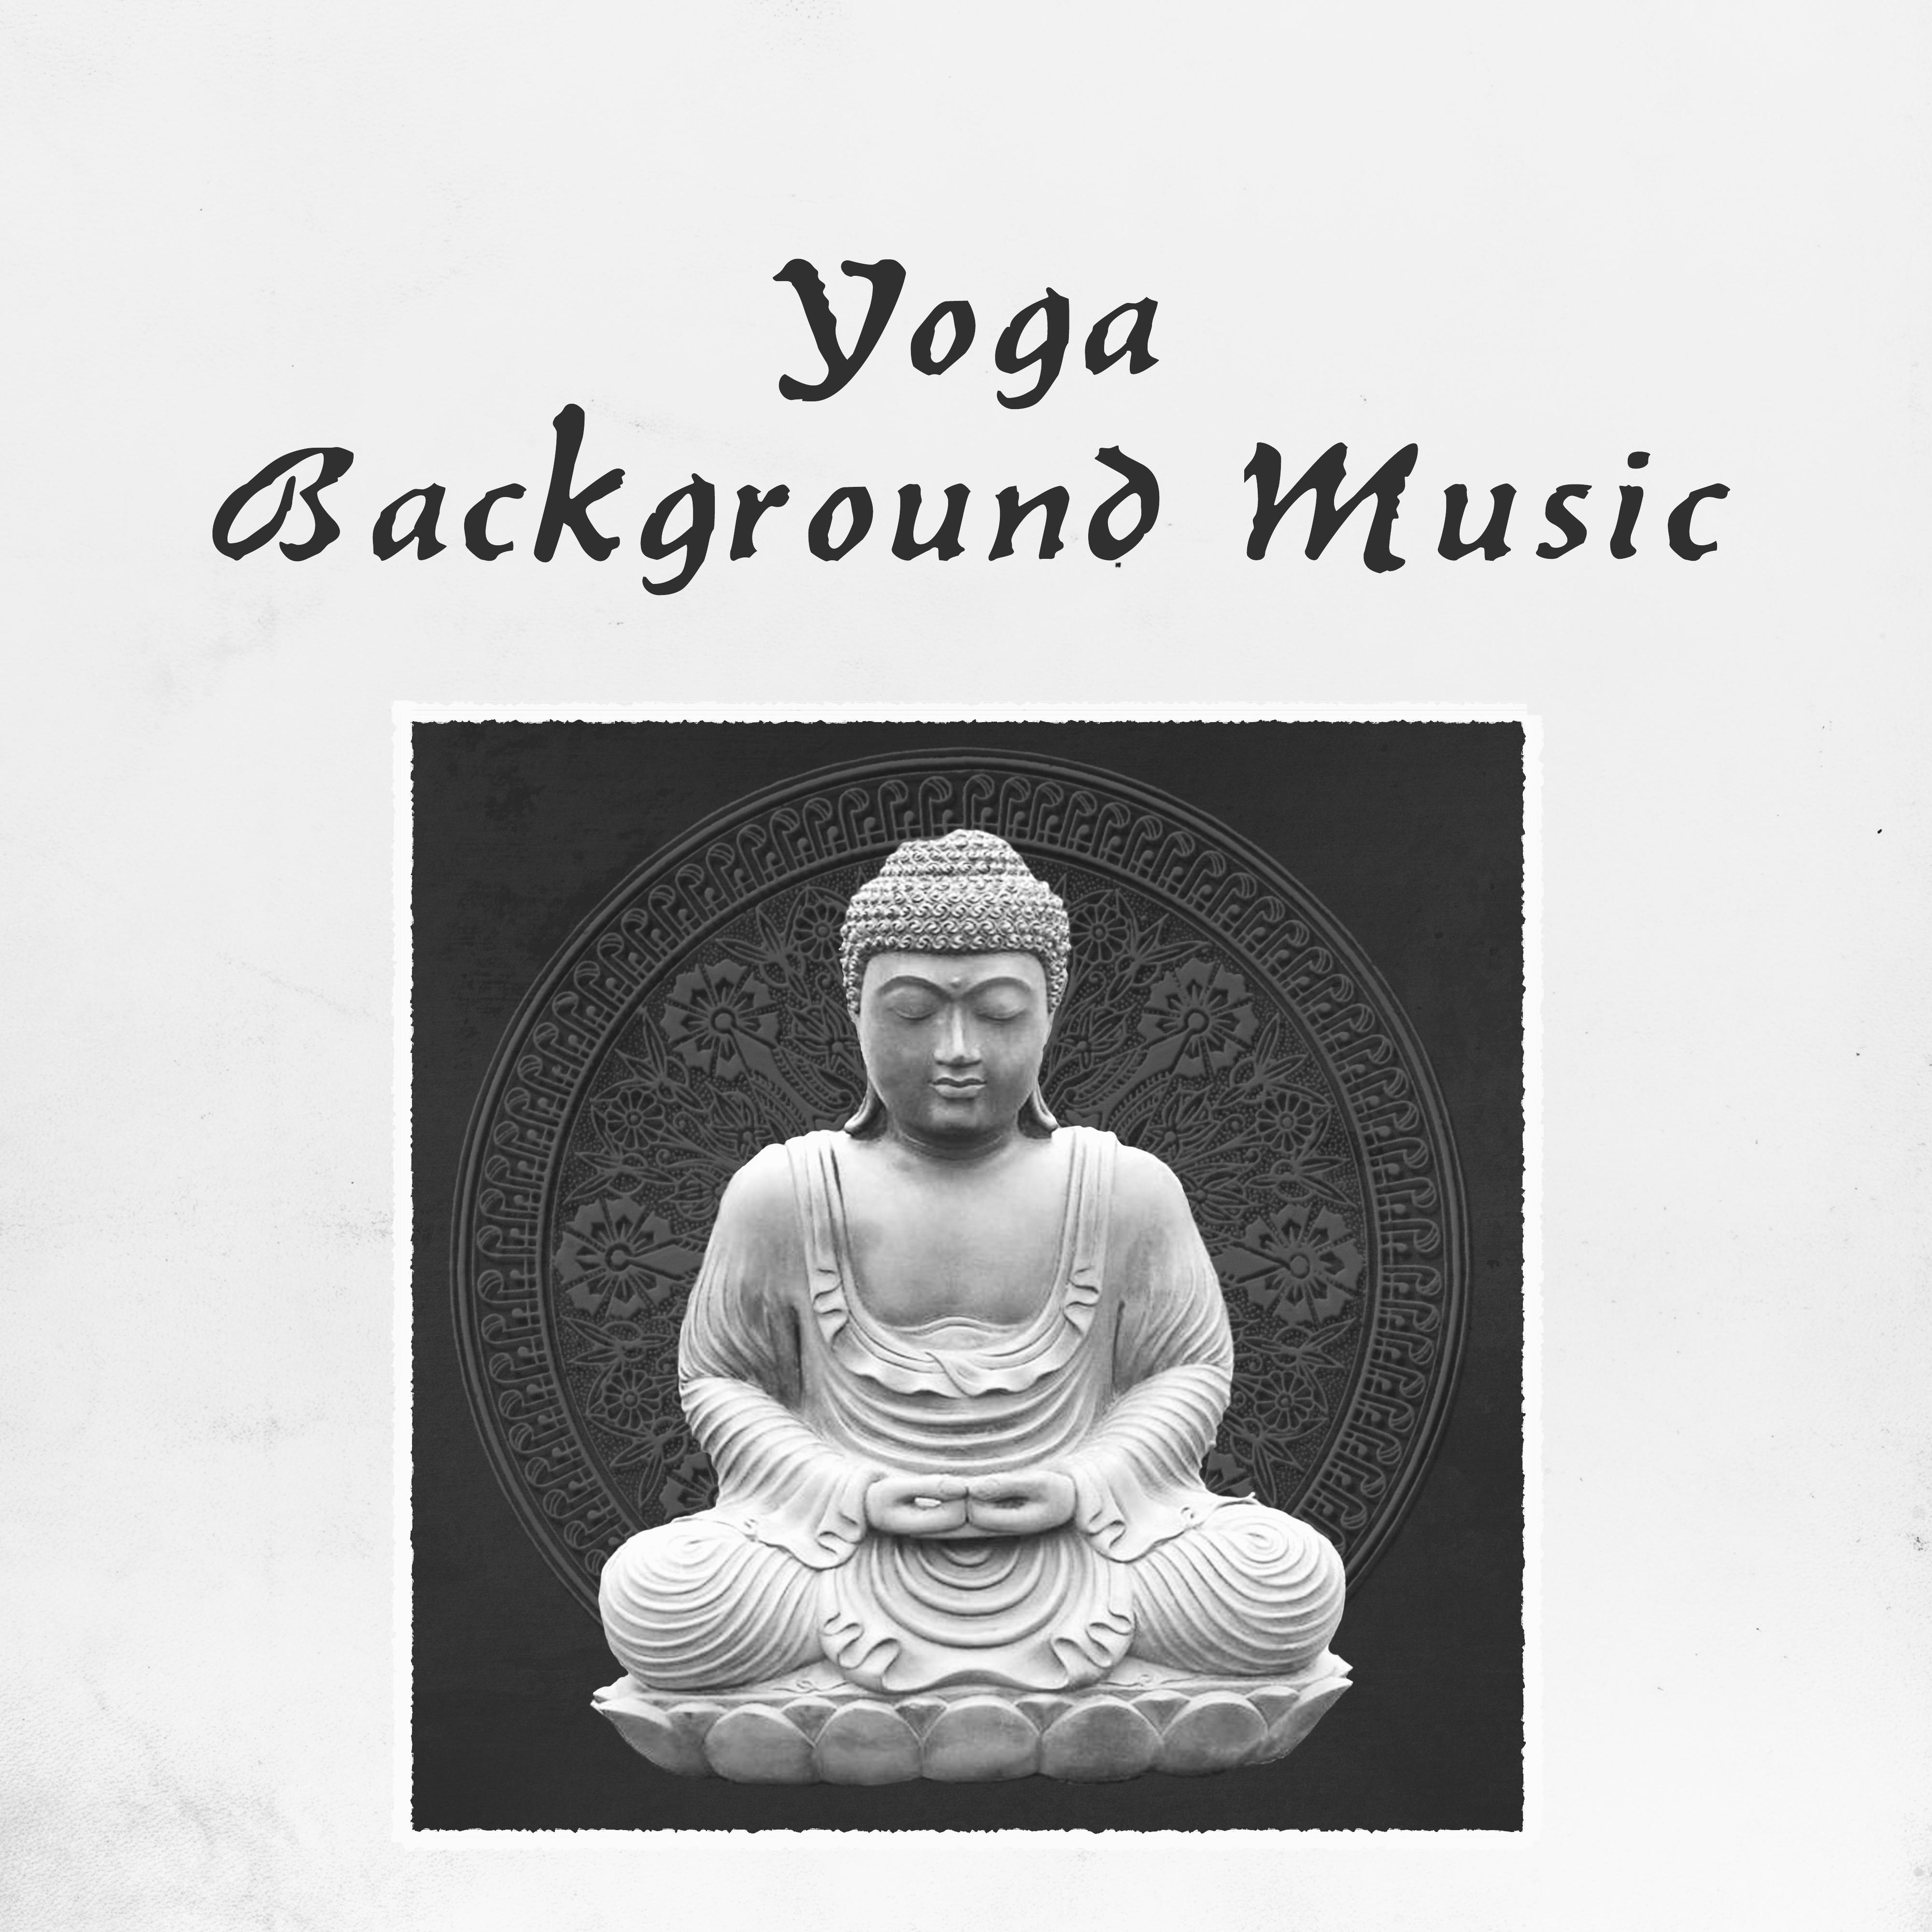 Yoga Background Music  Relaxing Nature Sounds for Yoga Meditation, The Greatest Yoga Music for Deep Meditation  Relax